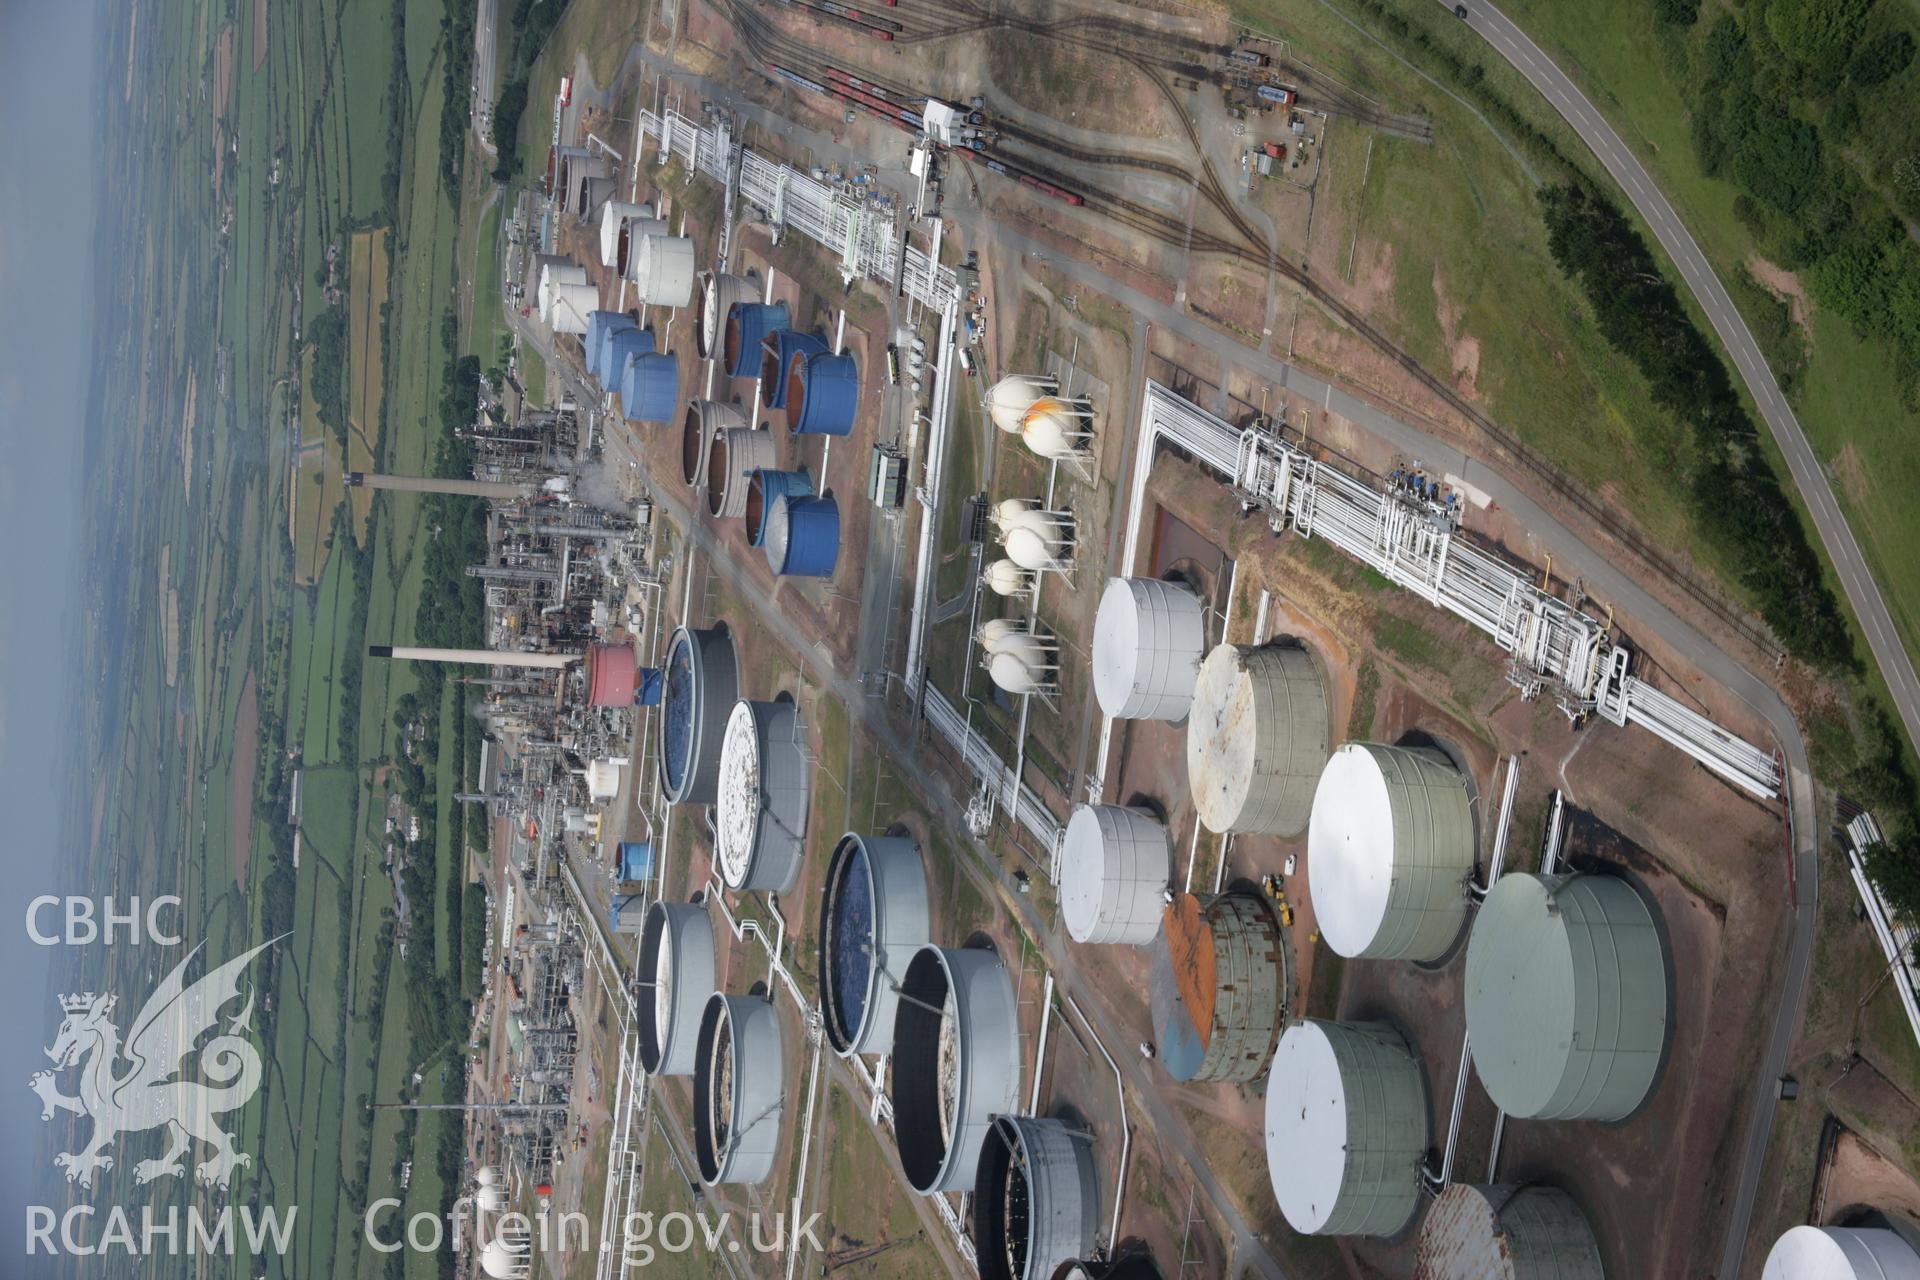 RCAHMW colour oblique aerial photograph of Amoco Oil Refinery, Milford Haven viewed from the south. Taken on 22 June 2005 by Toby Driver